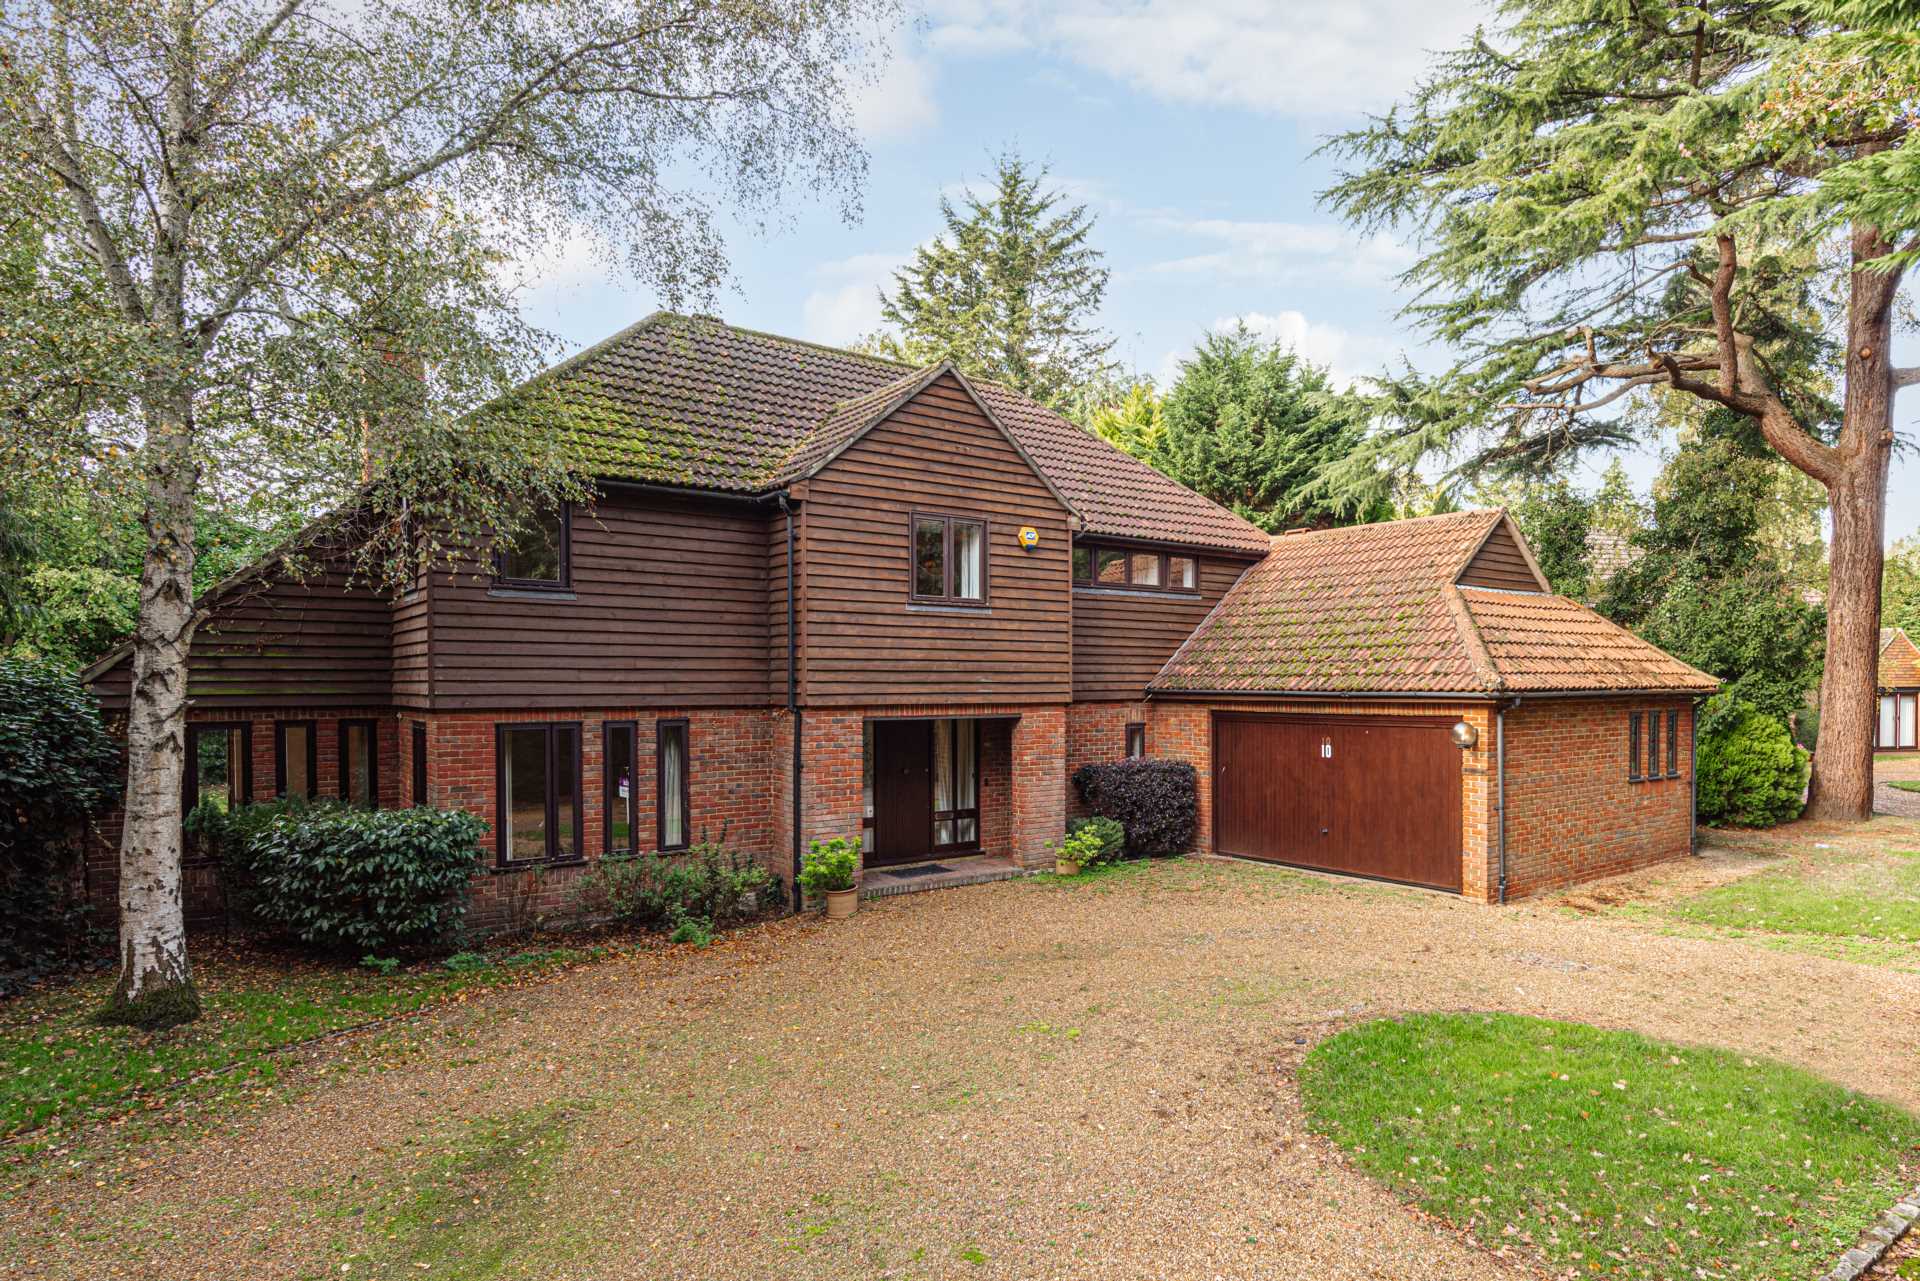 5 bed House (unspecified) for rent in Esher. From The Personal Agent - Epsom